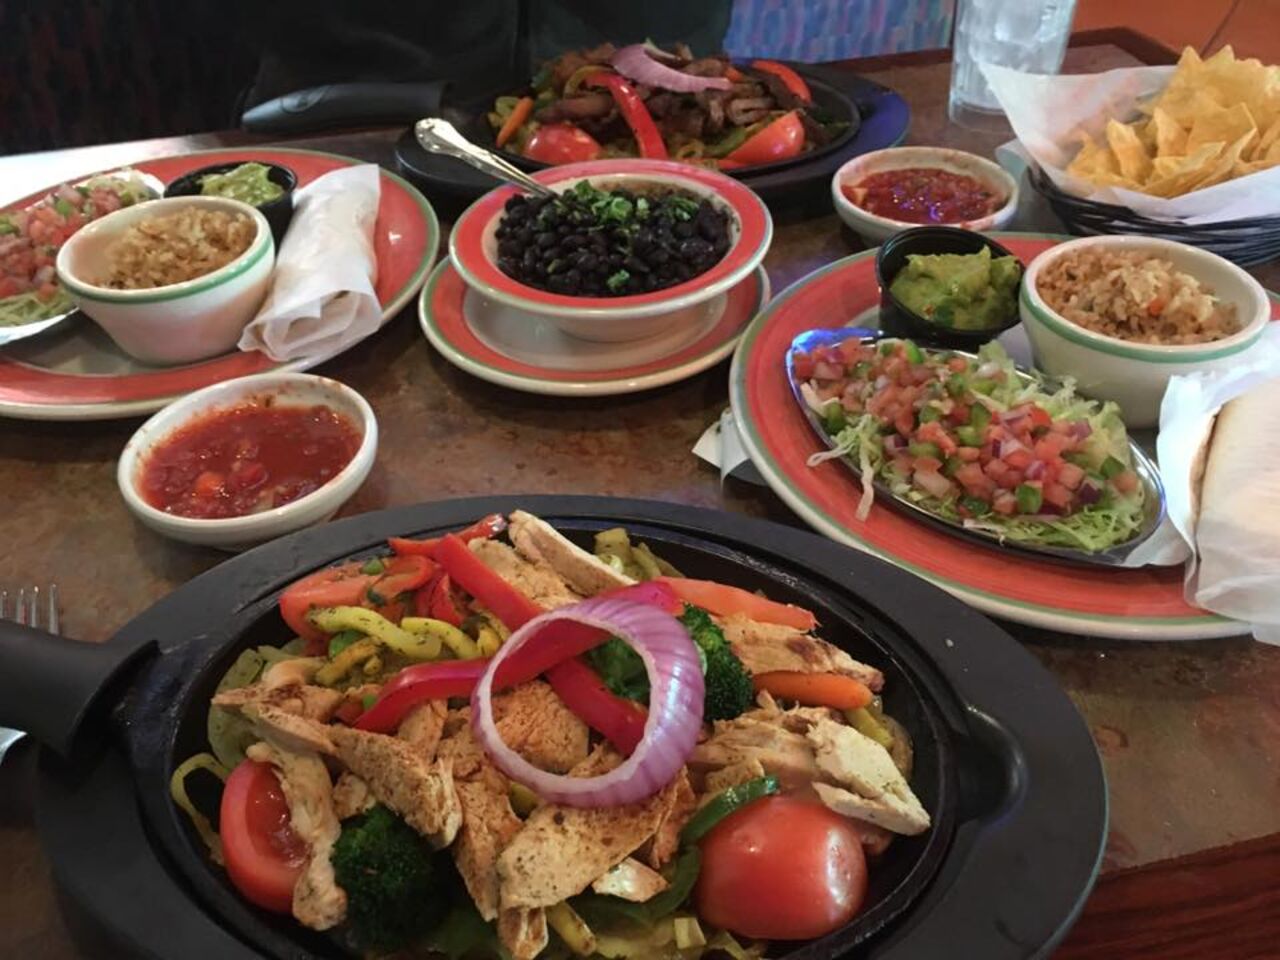 A photo of Paradiso Mexican Restaurant